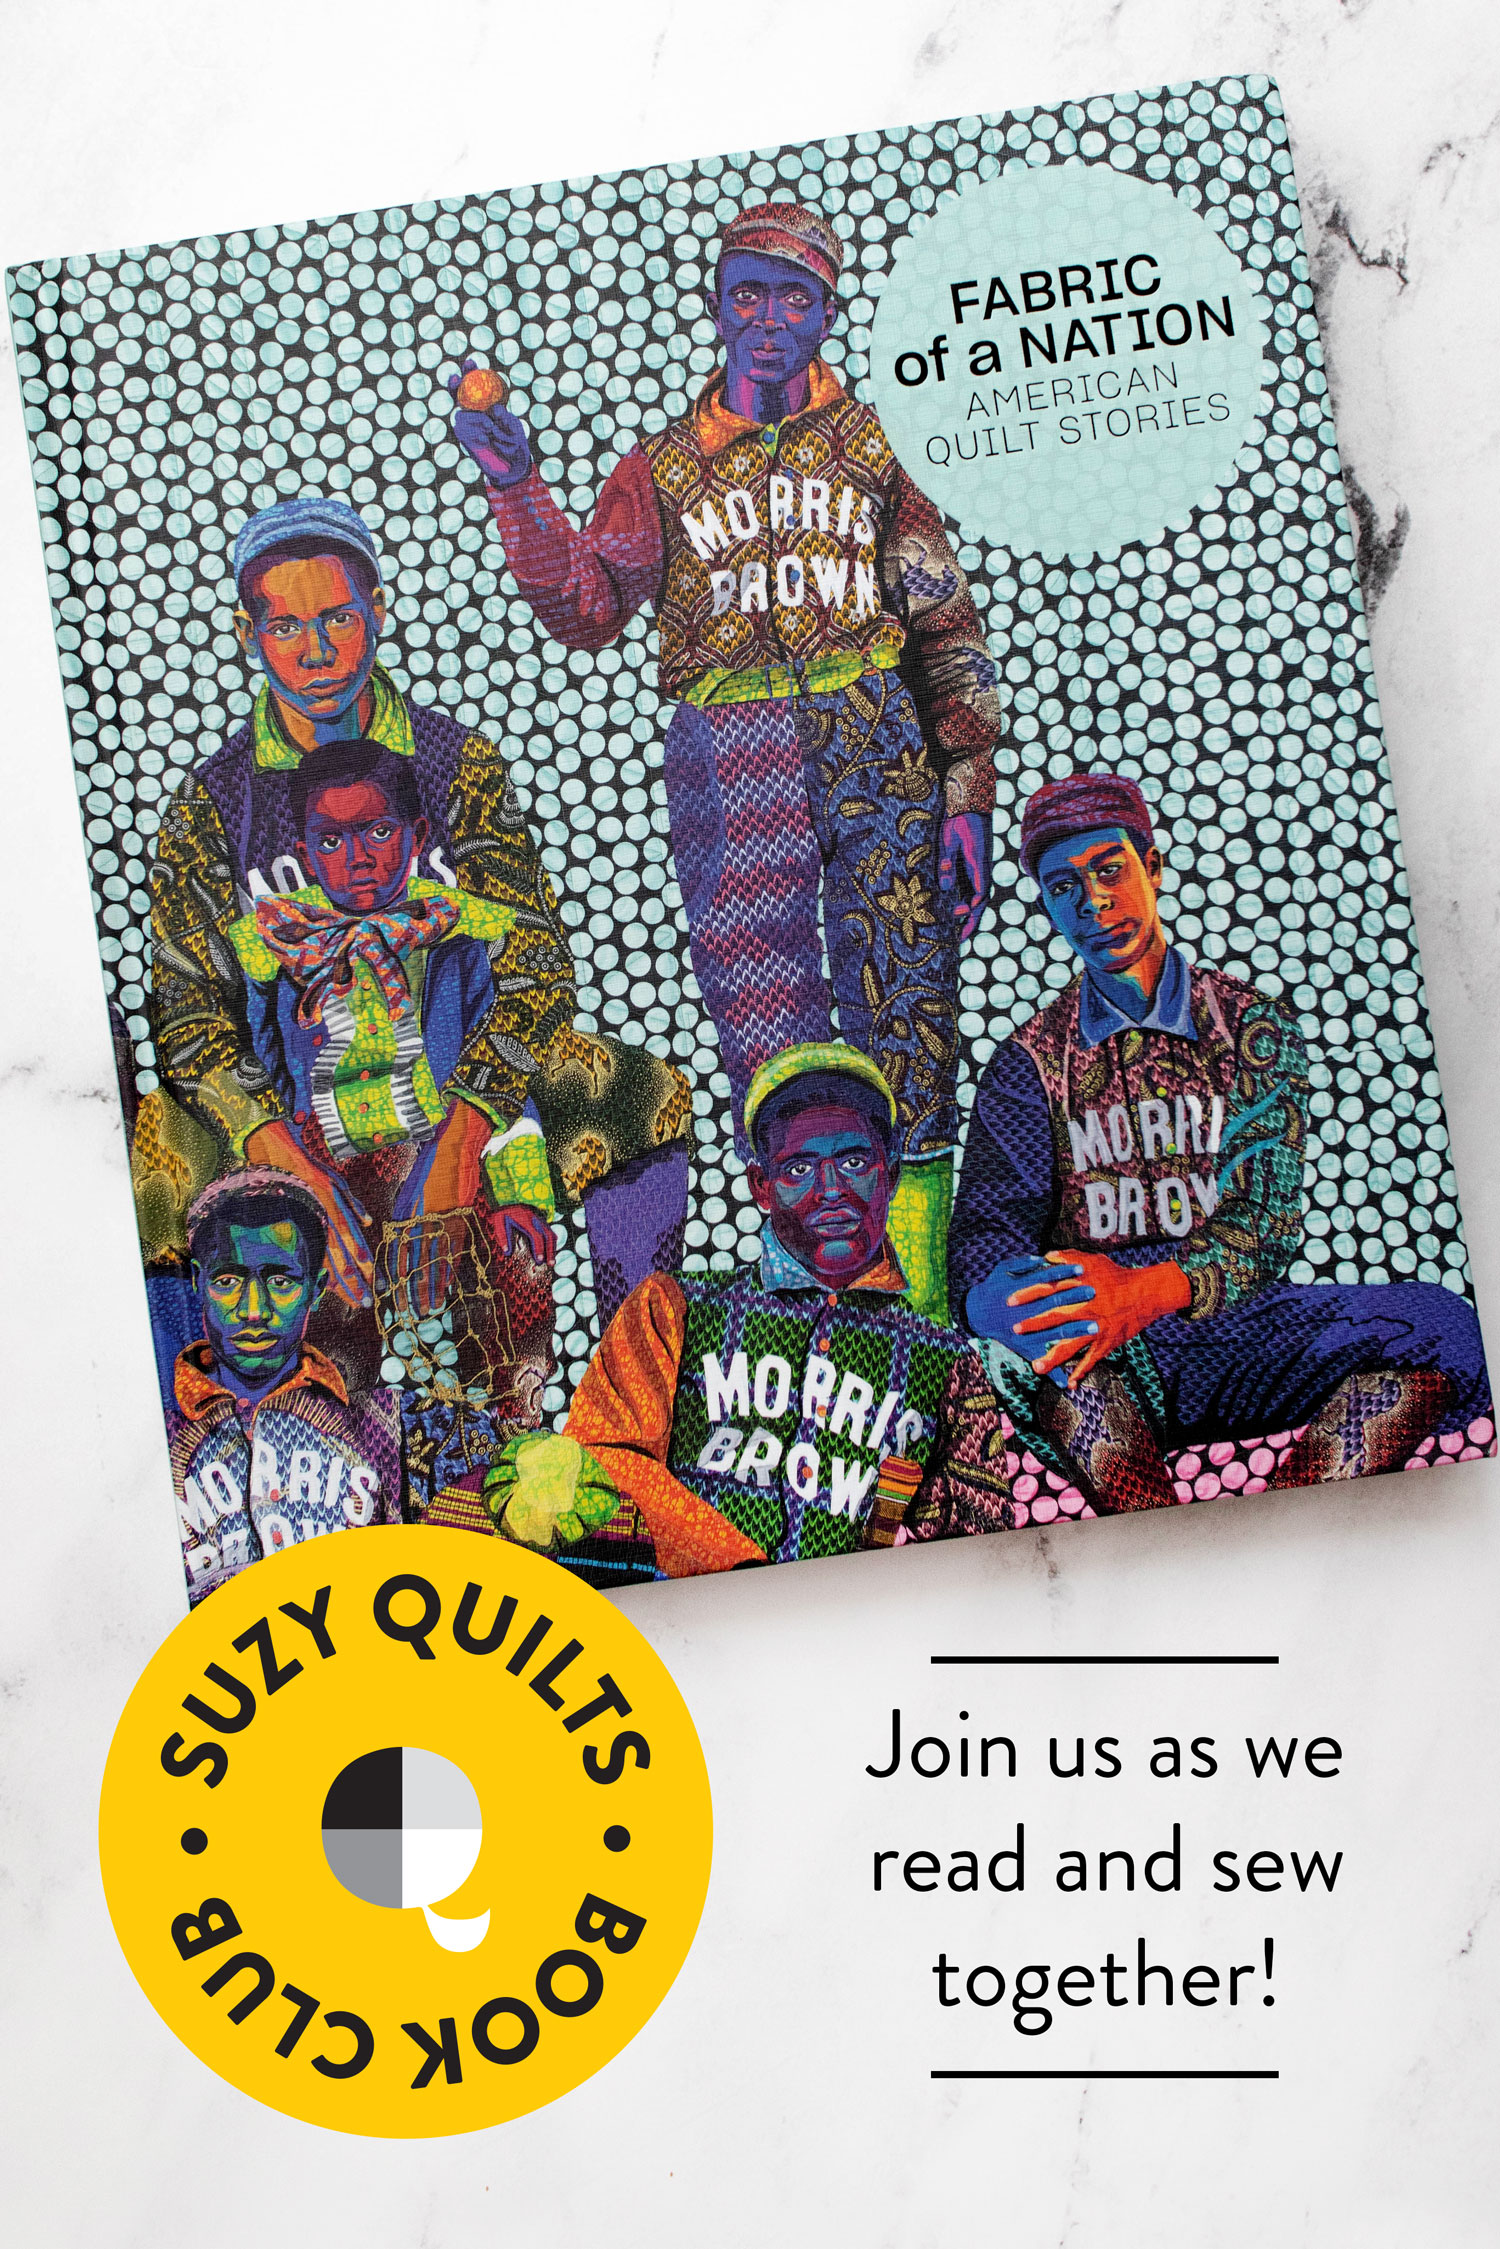 Join us for Part Two of our Suzy Quilts Book Club discussion for the book Fabric of a Nation! suzyquilts.com #quilting #quilthistory